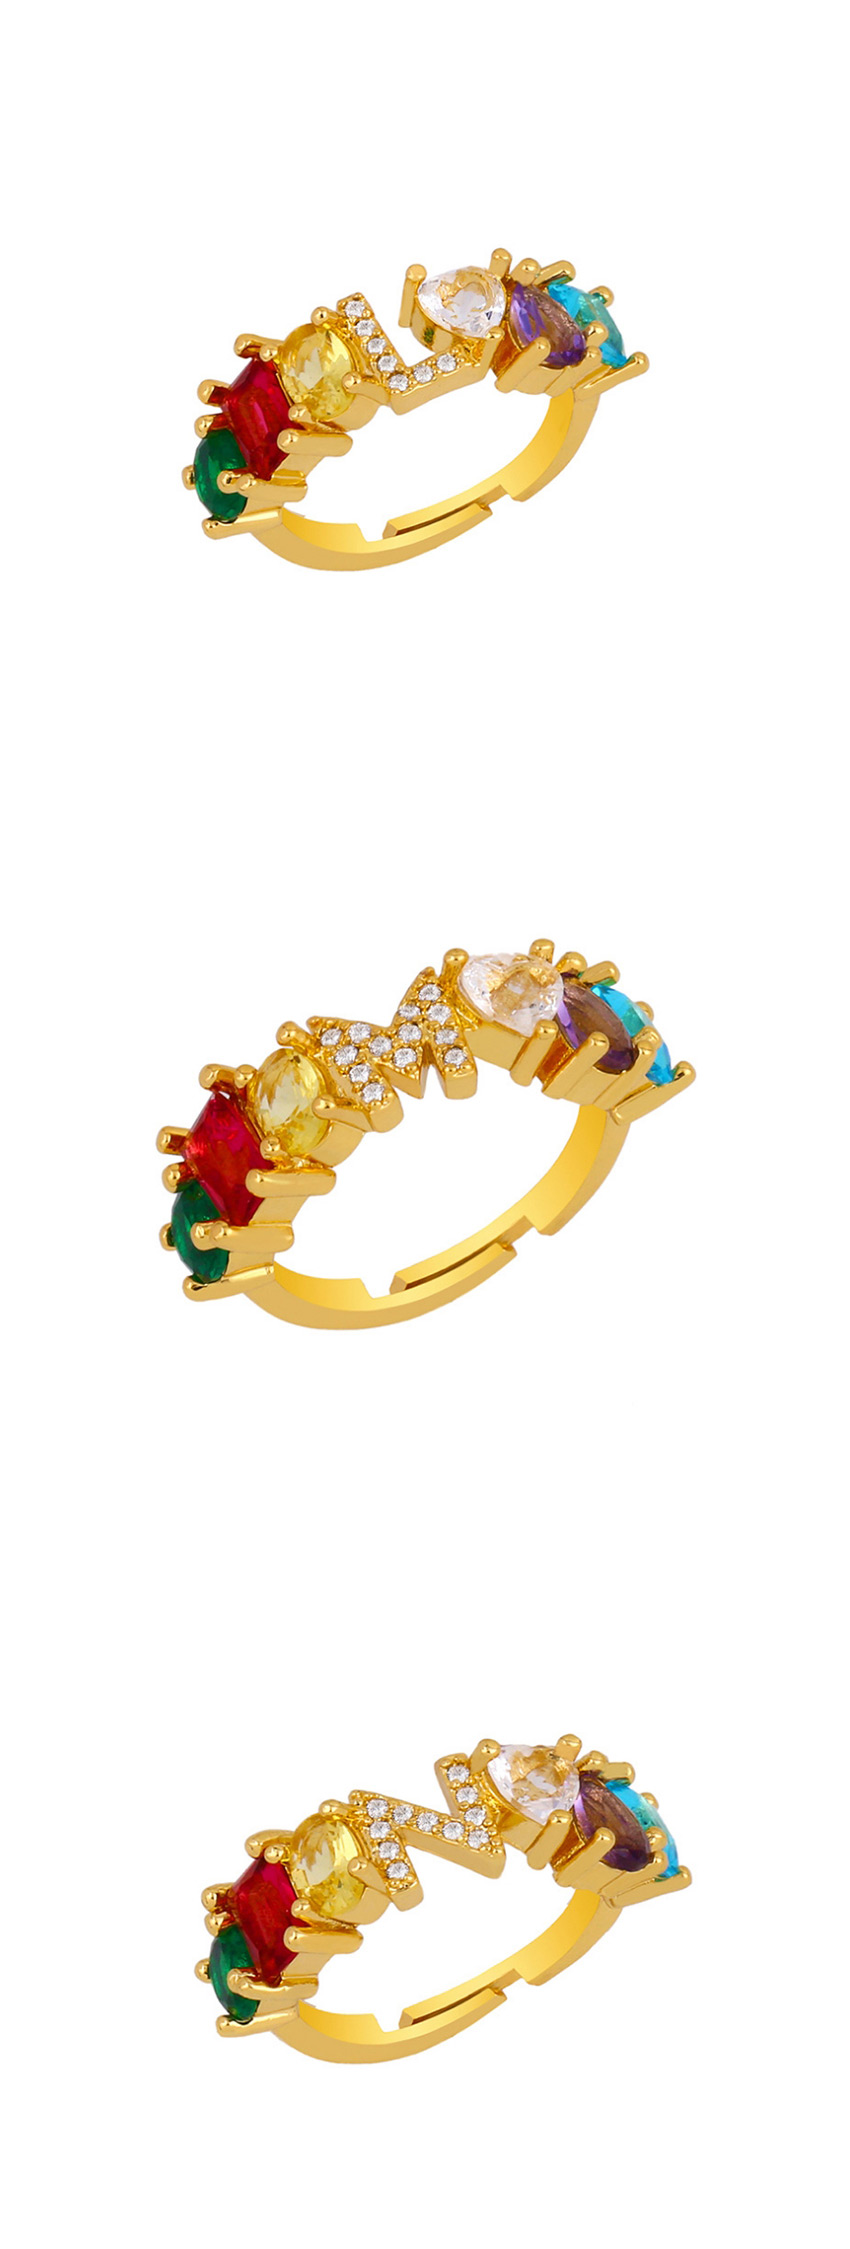 Fashion M Gold Heart-shaped Adjustable Ring With Colorful Diamond Letters,Rings